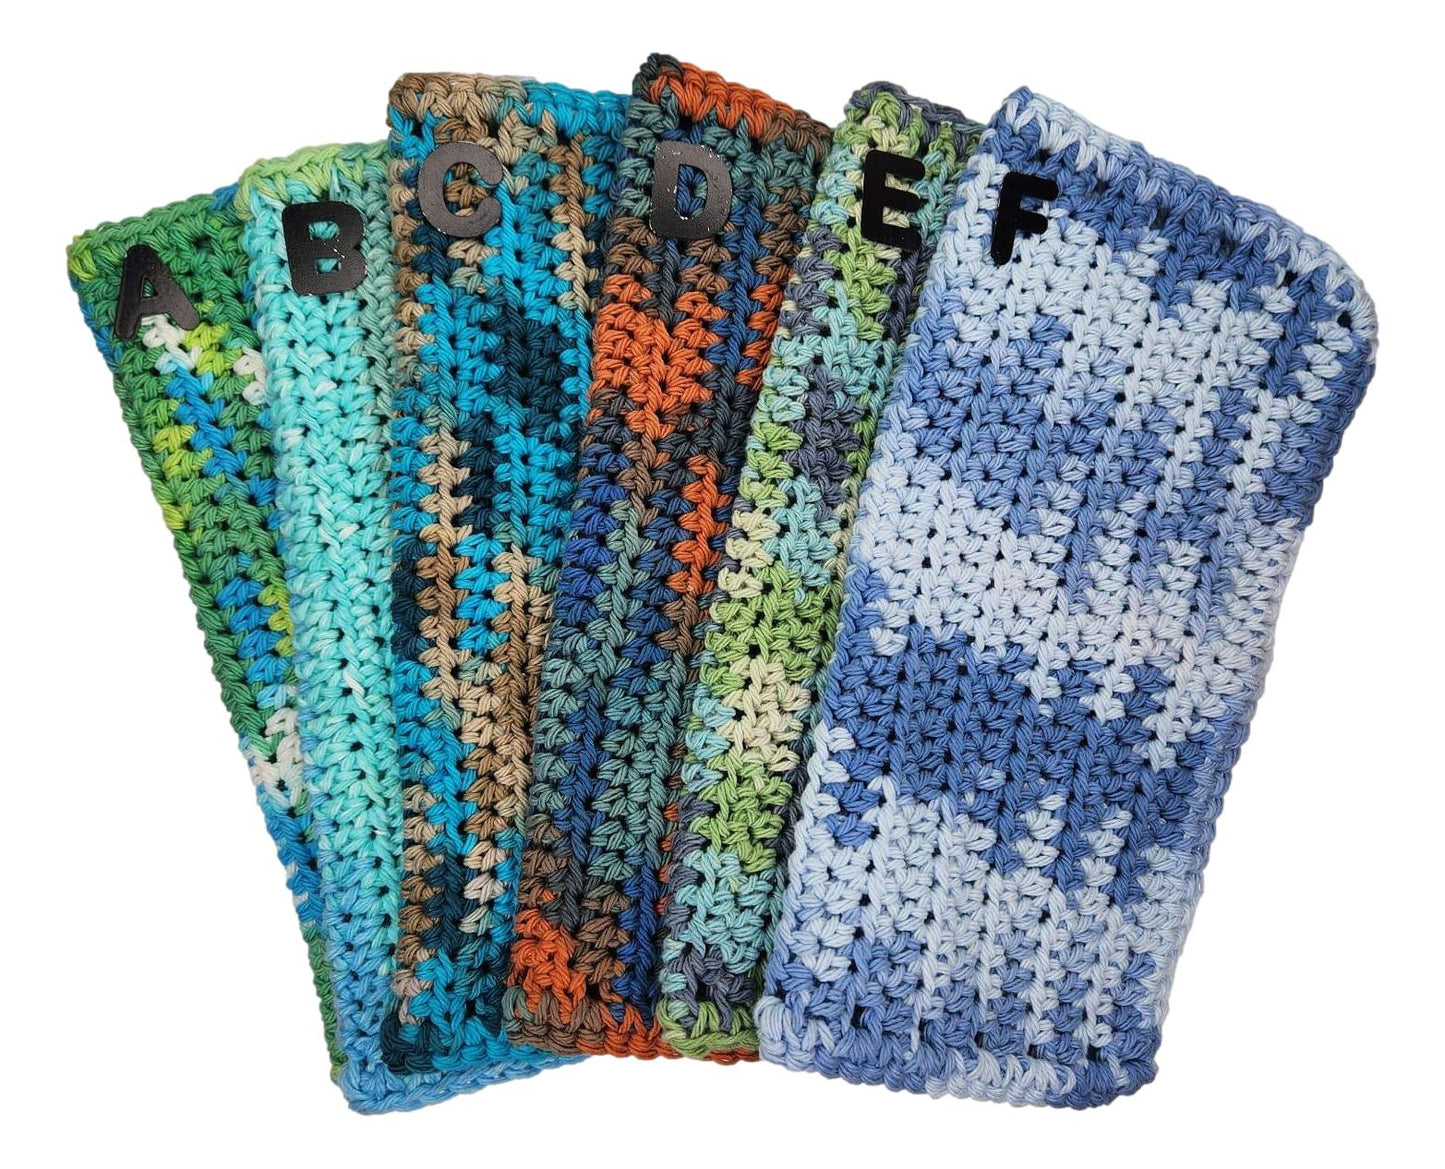 Dish Cloth Knit Single Multi-Color Handwoven by New Mexico Artist 10 L x 9 W Inches - Ysleta Mission Gift Shop- VOTED 2022 El Paso's Best Gift Shop